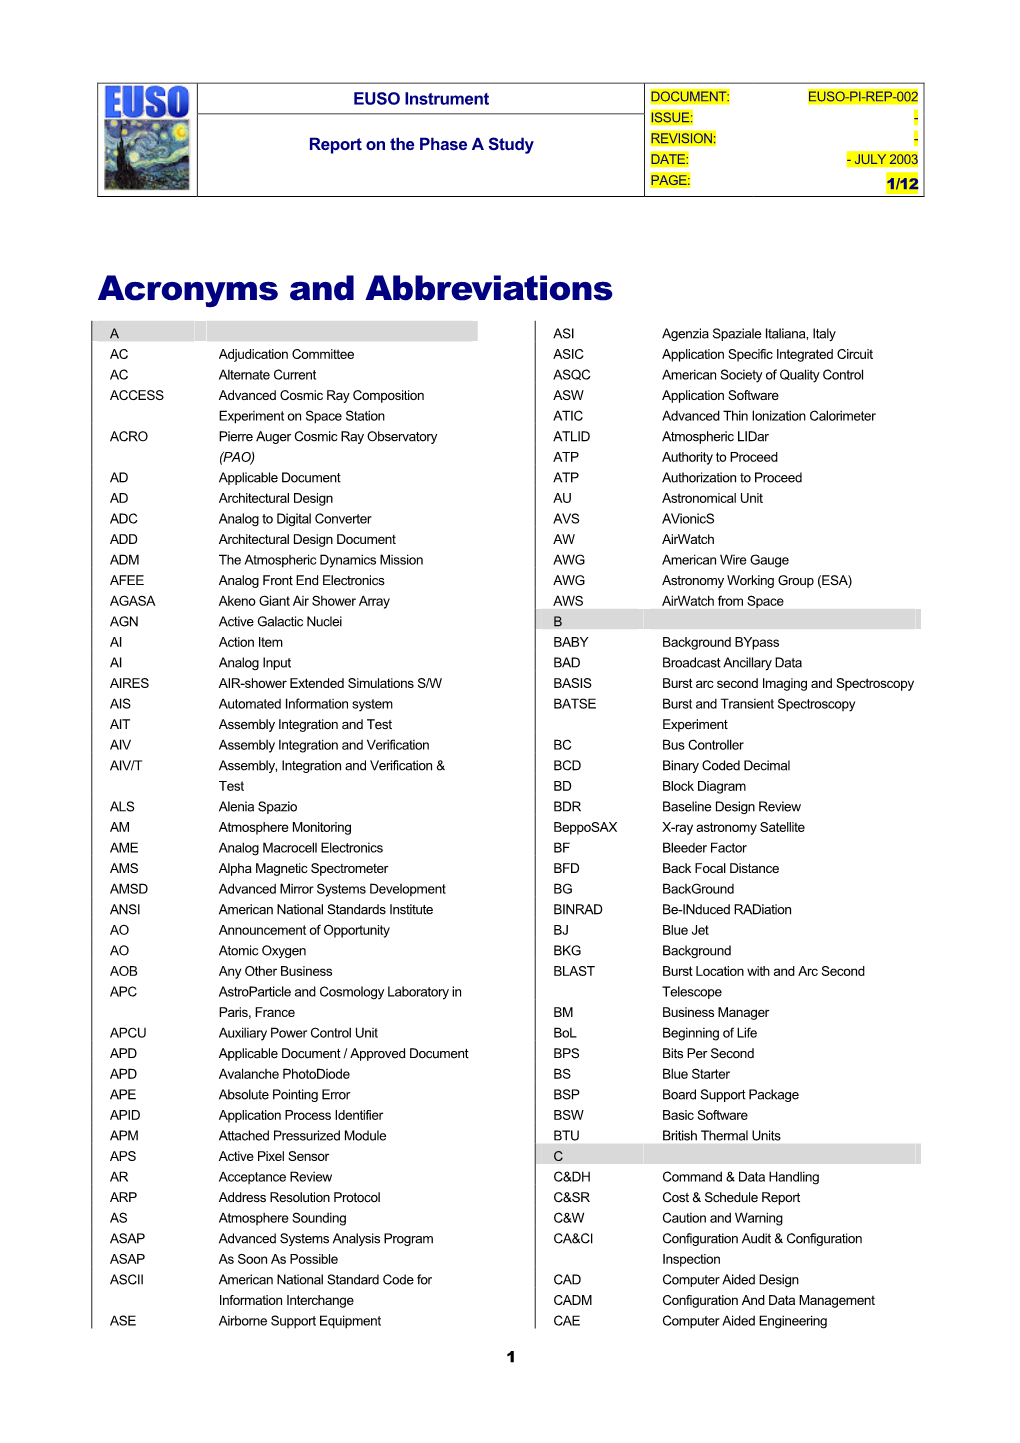 Acronyms and Abbreviations